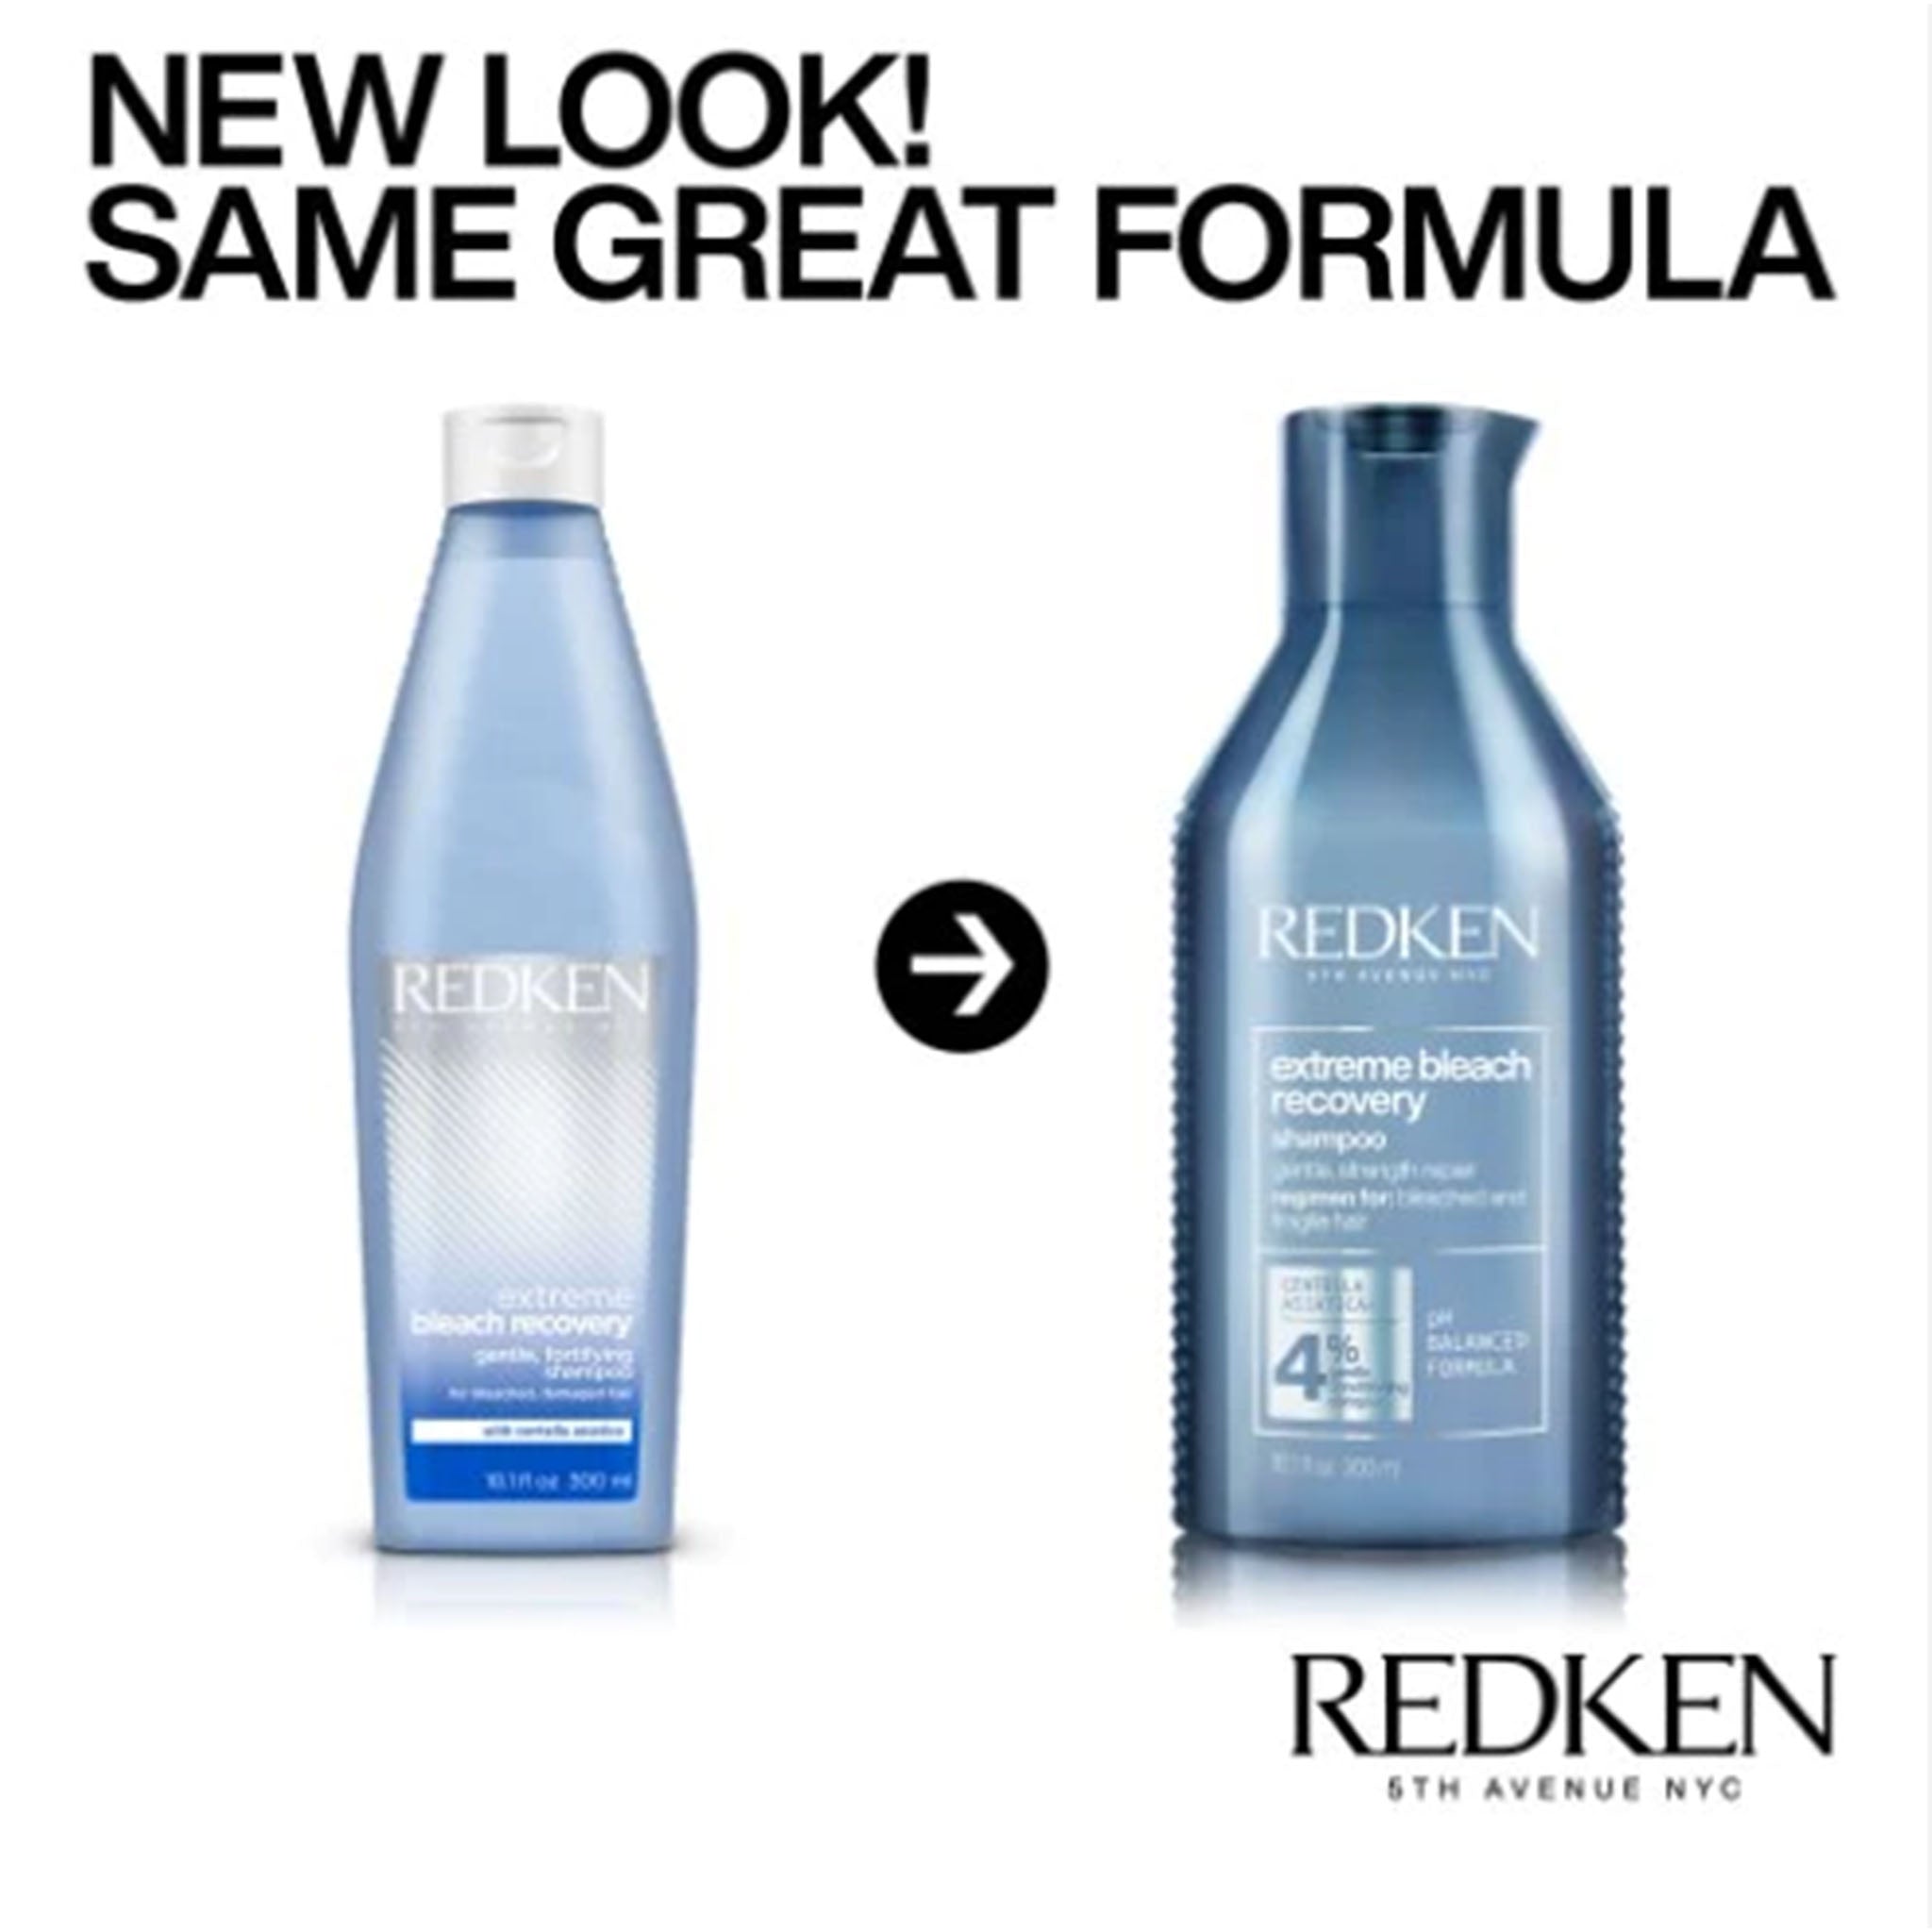 Redken. Shampoing Extreme Bleach Recovery - 300ml - Concept C. Shop